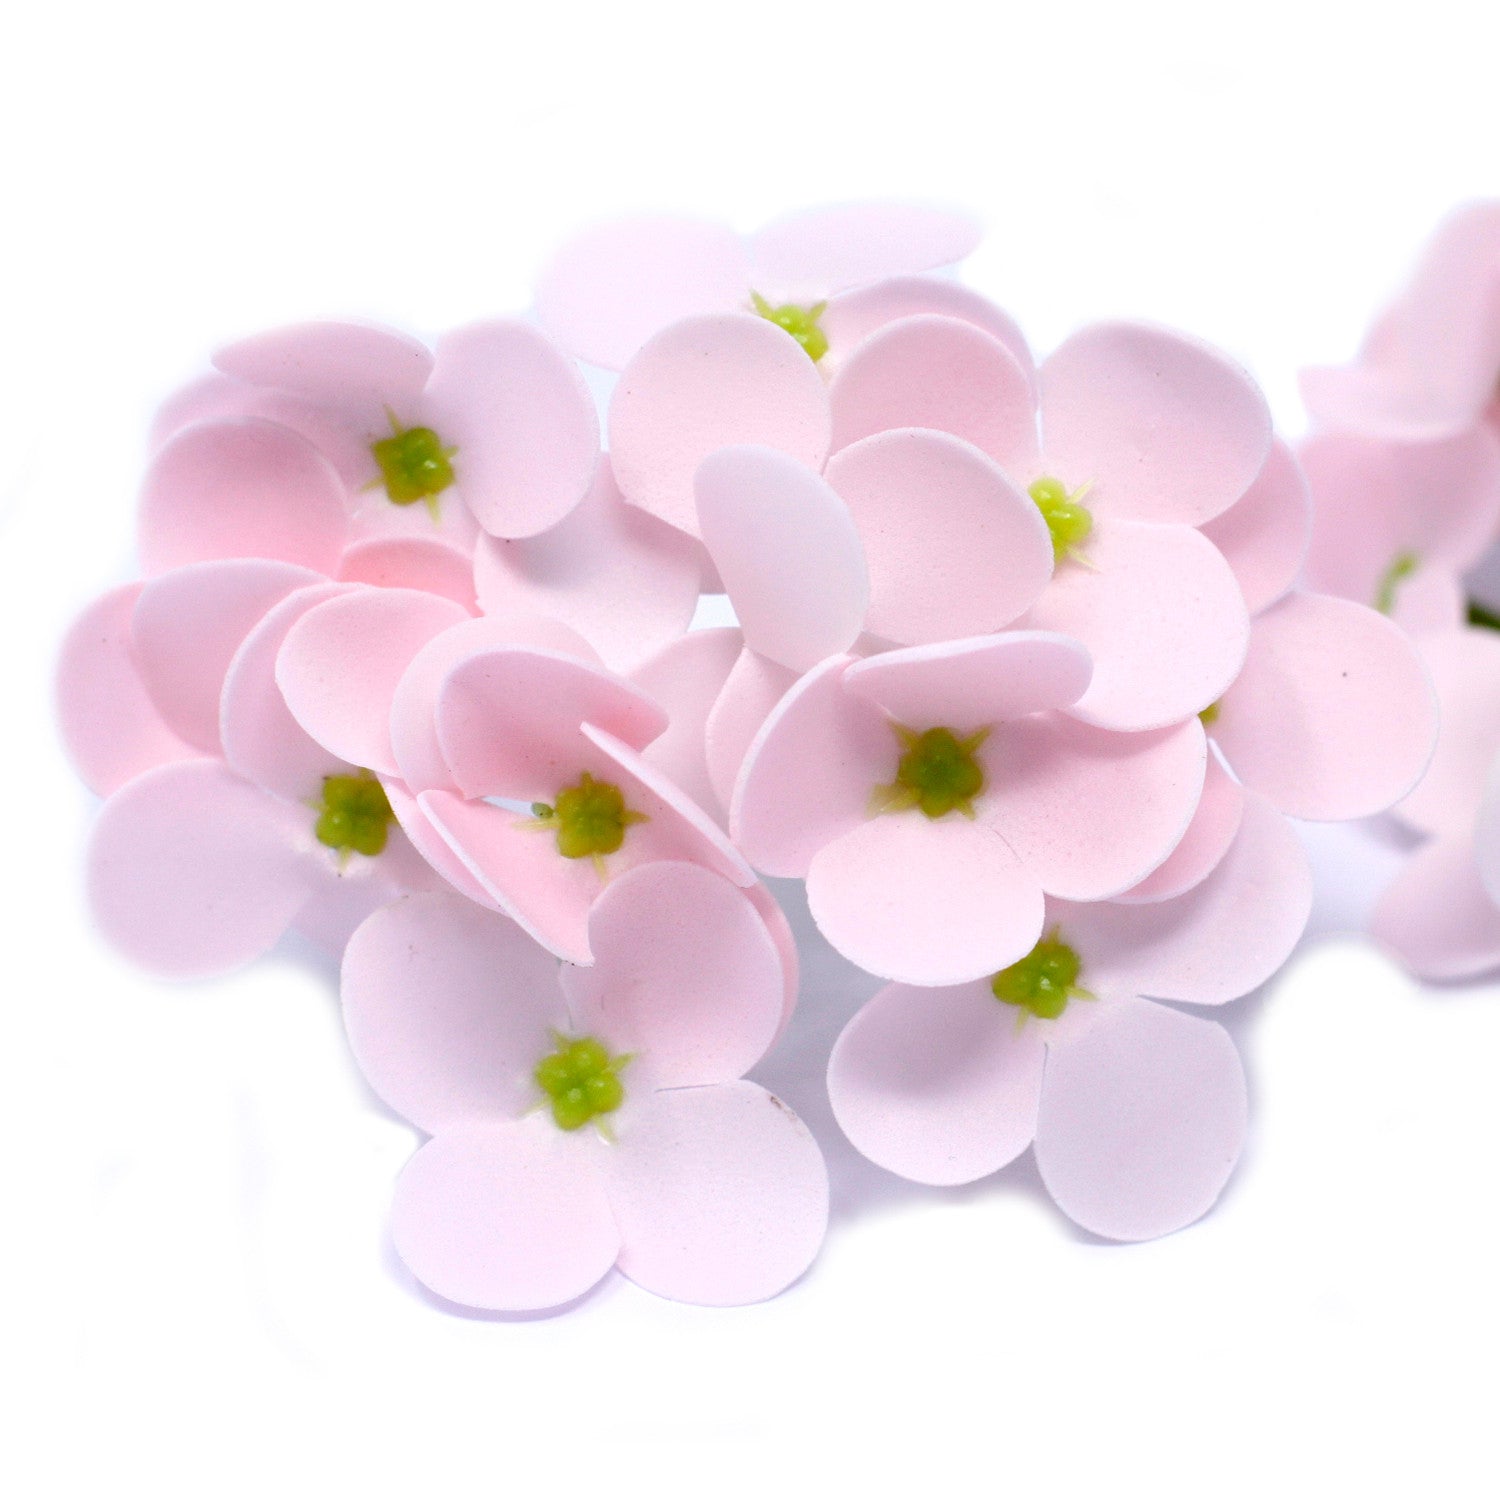 View Craft Soap Flowers Hyacinth Bean Pink information